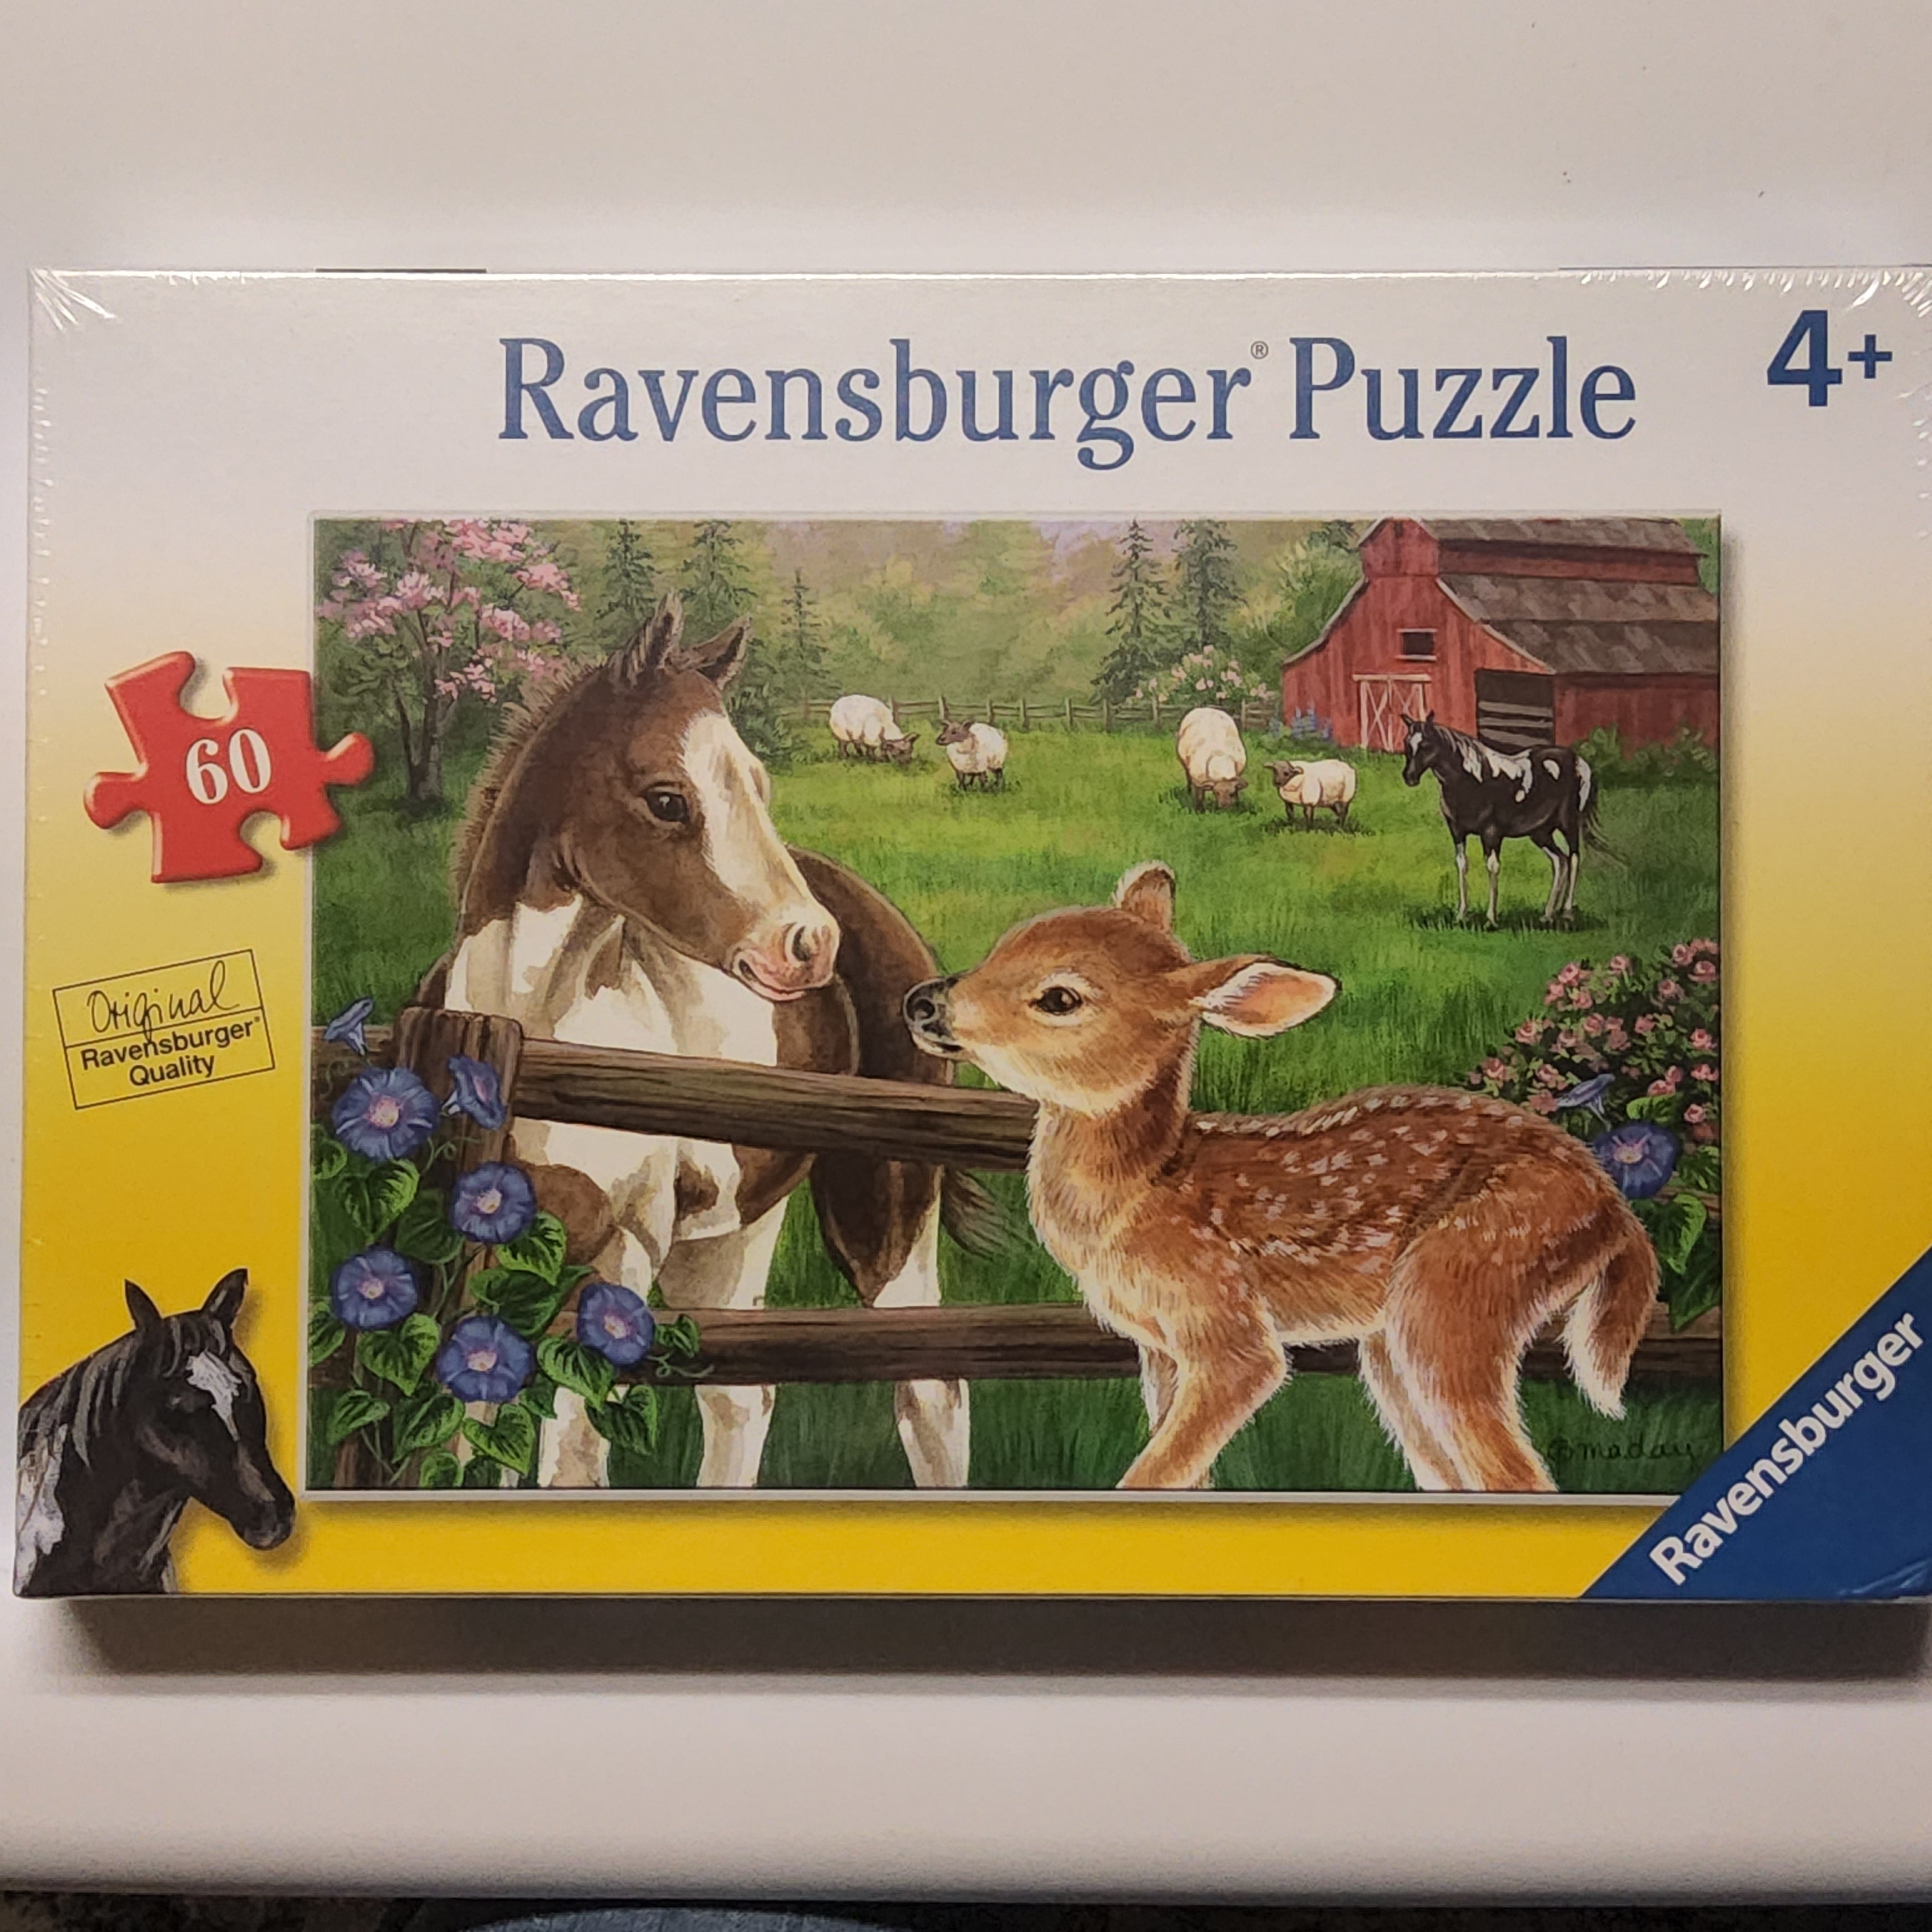 Ravensburger Puzzle - New Neighbours - 60 pieces - 09625